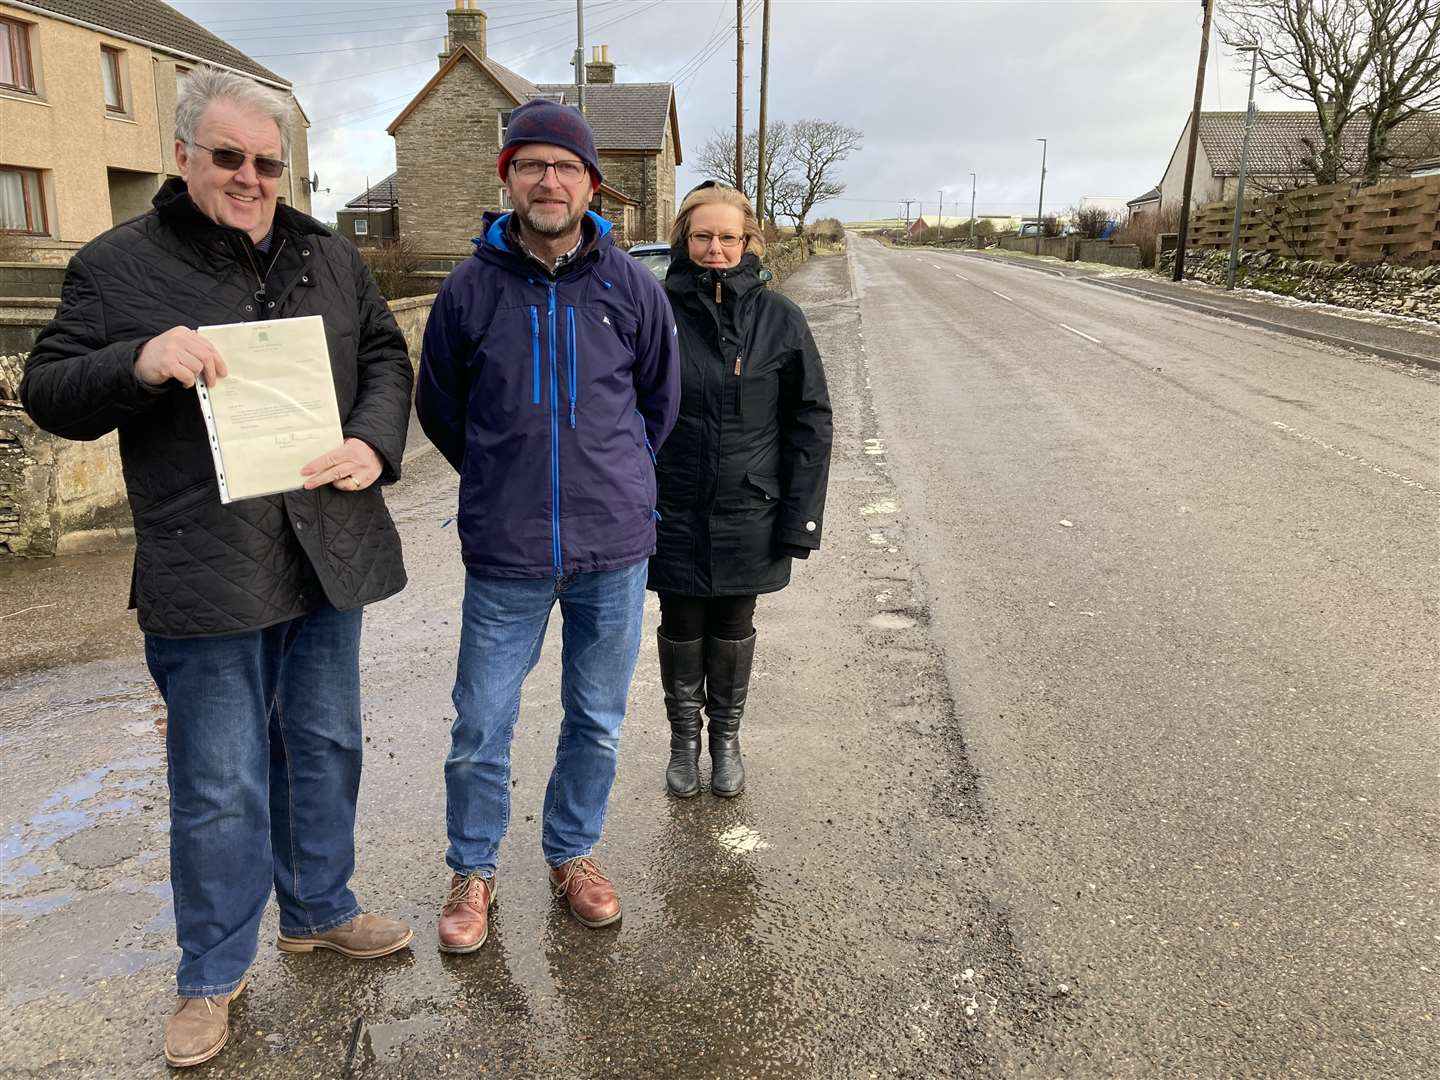 Councillor Matthew Reiss (centre) with Forss residents John Ross and Julie Minchin. Mr Ross is holding a Forss speed limit petition Lord Thurso gave to Councillor Reiss after he was first elected in 2013. Picture: Alison Reiss